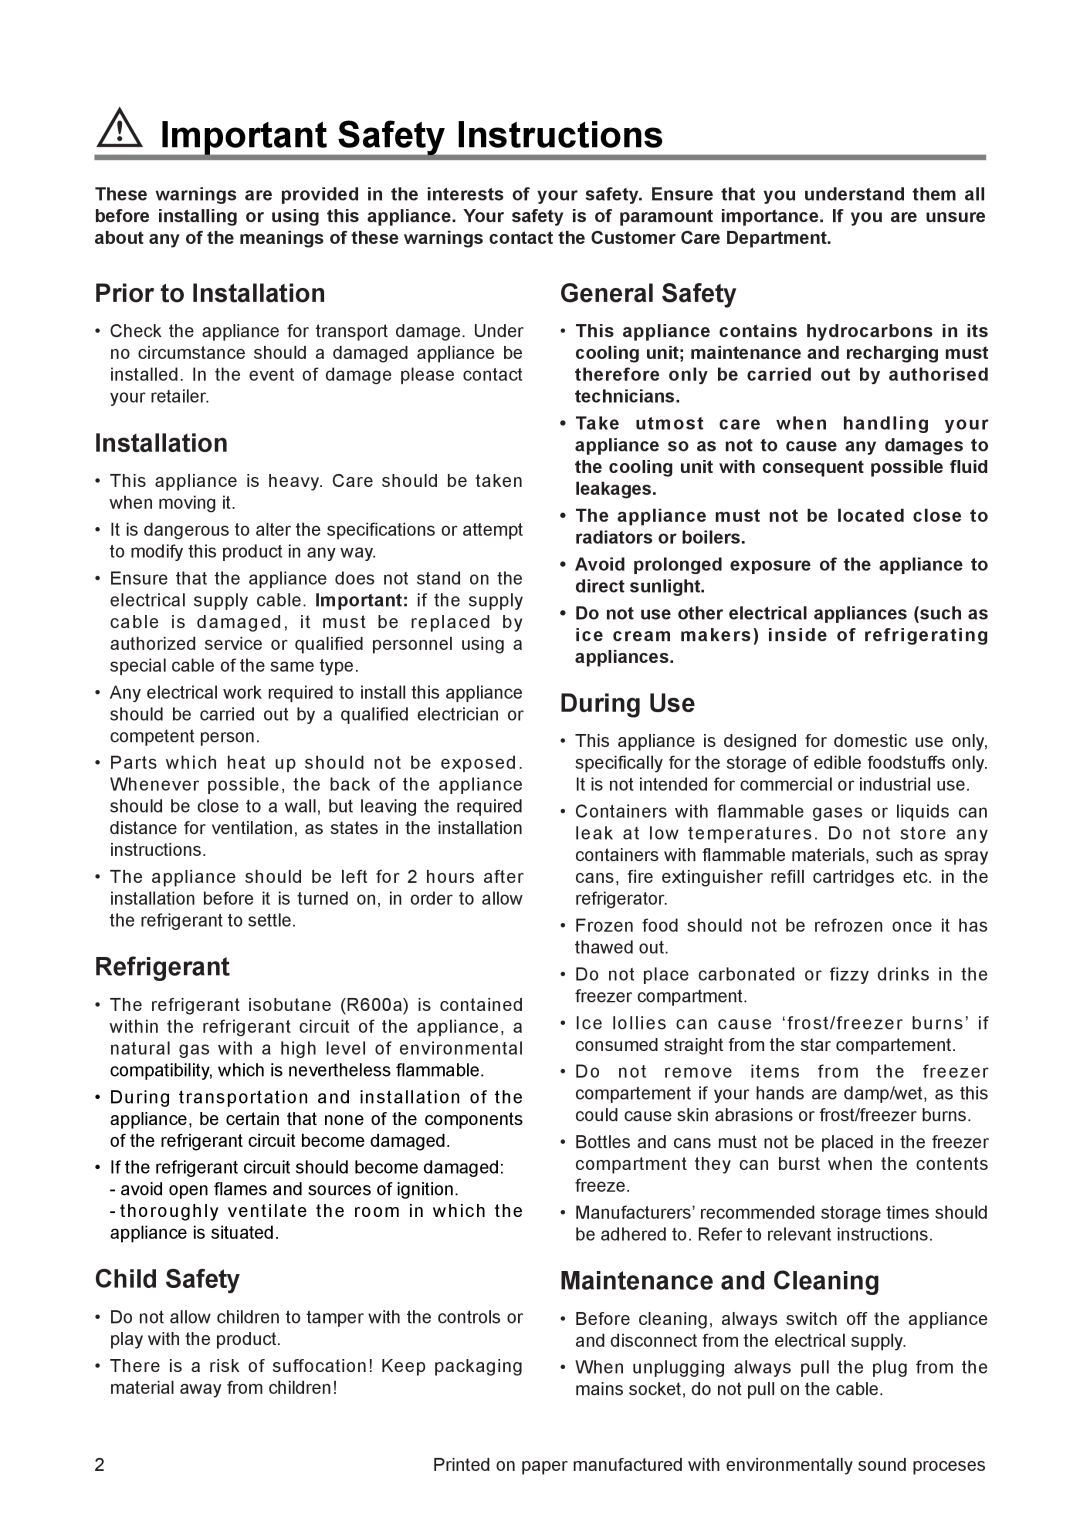 Electrolux FRF 120 manual Important Safety Instructions, Prior to Installation, Refrigerant, General Safety, During Use 